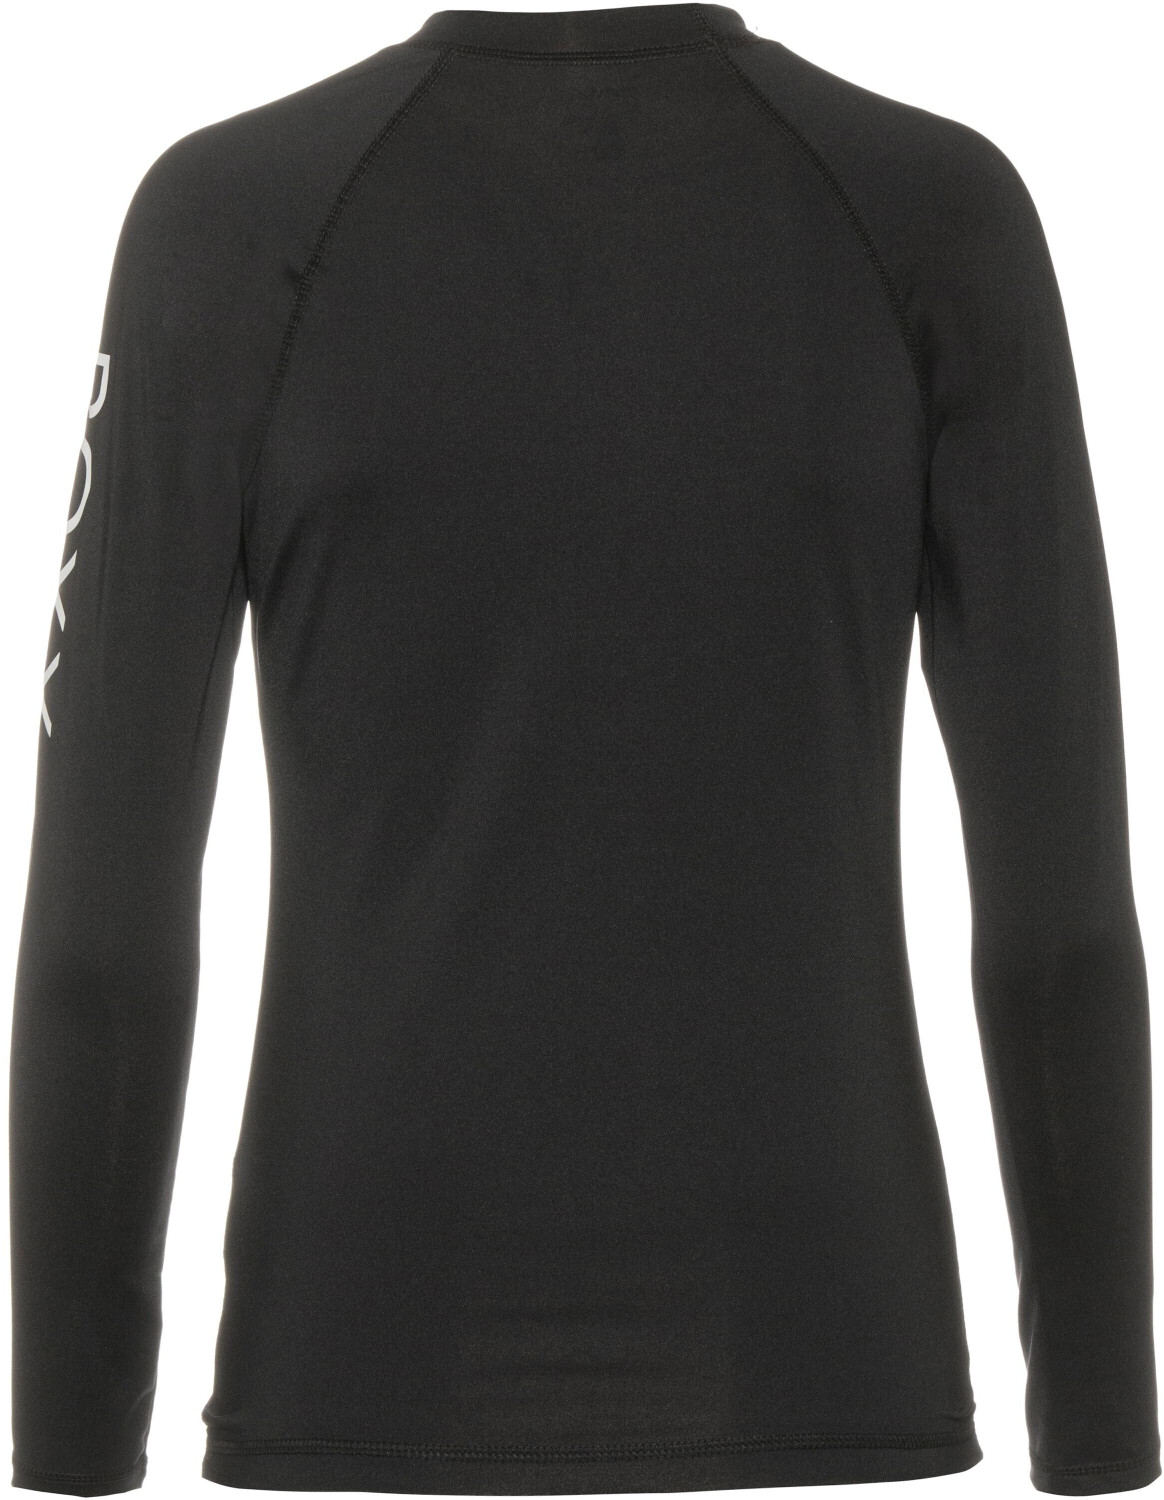 Camiseta Surf Wholehearted Roxy Y531A0006 